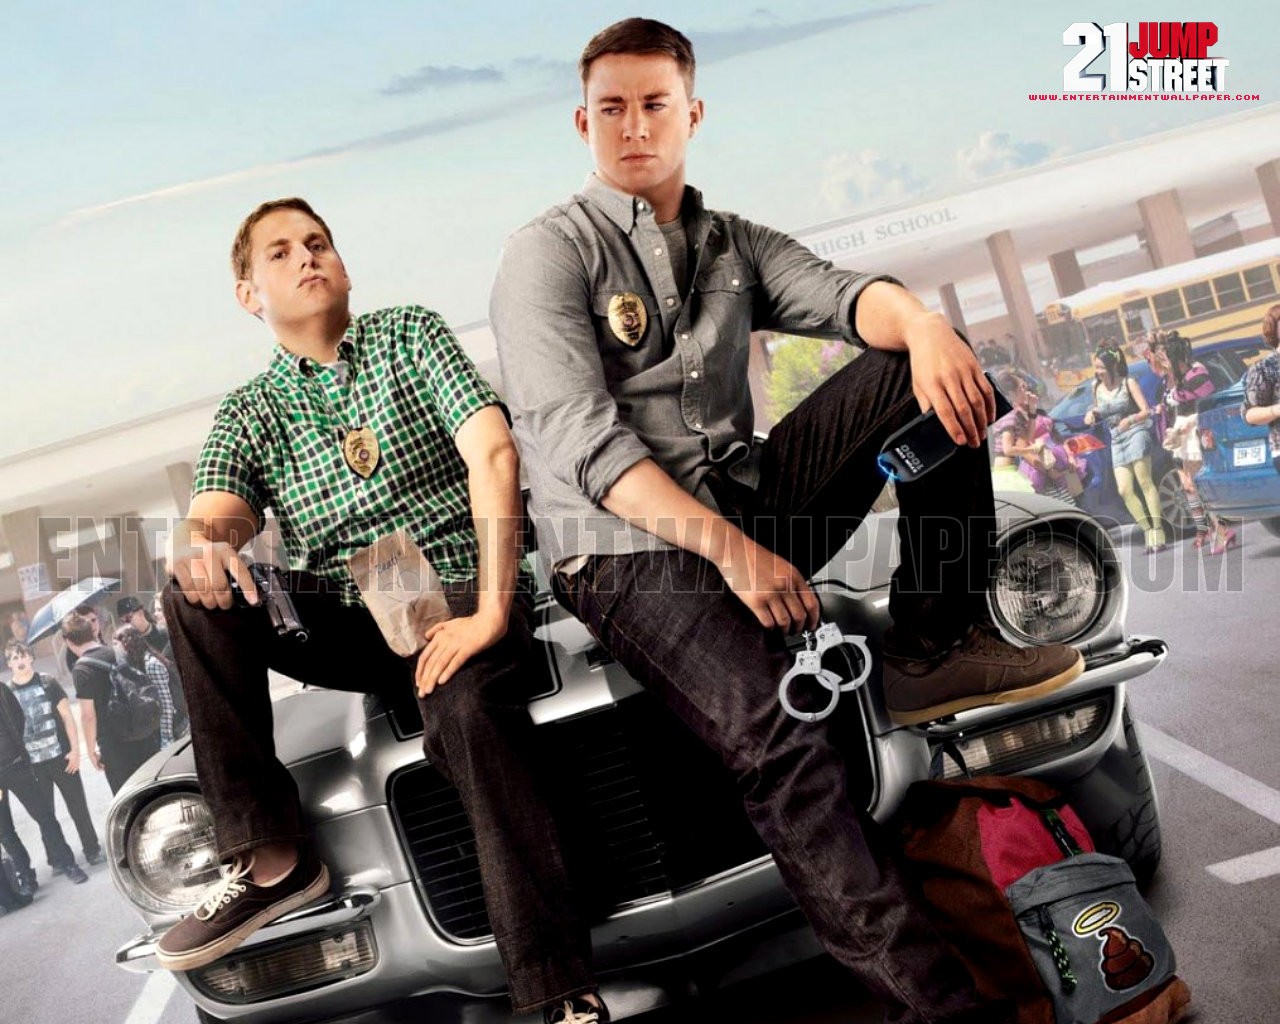 Movie Tv Show Jump Street Wallpaper Size More